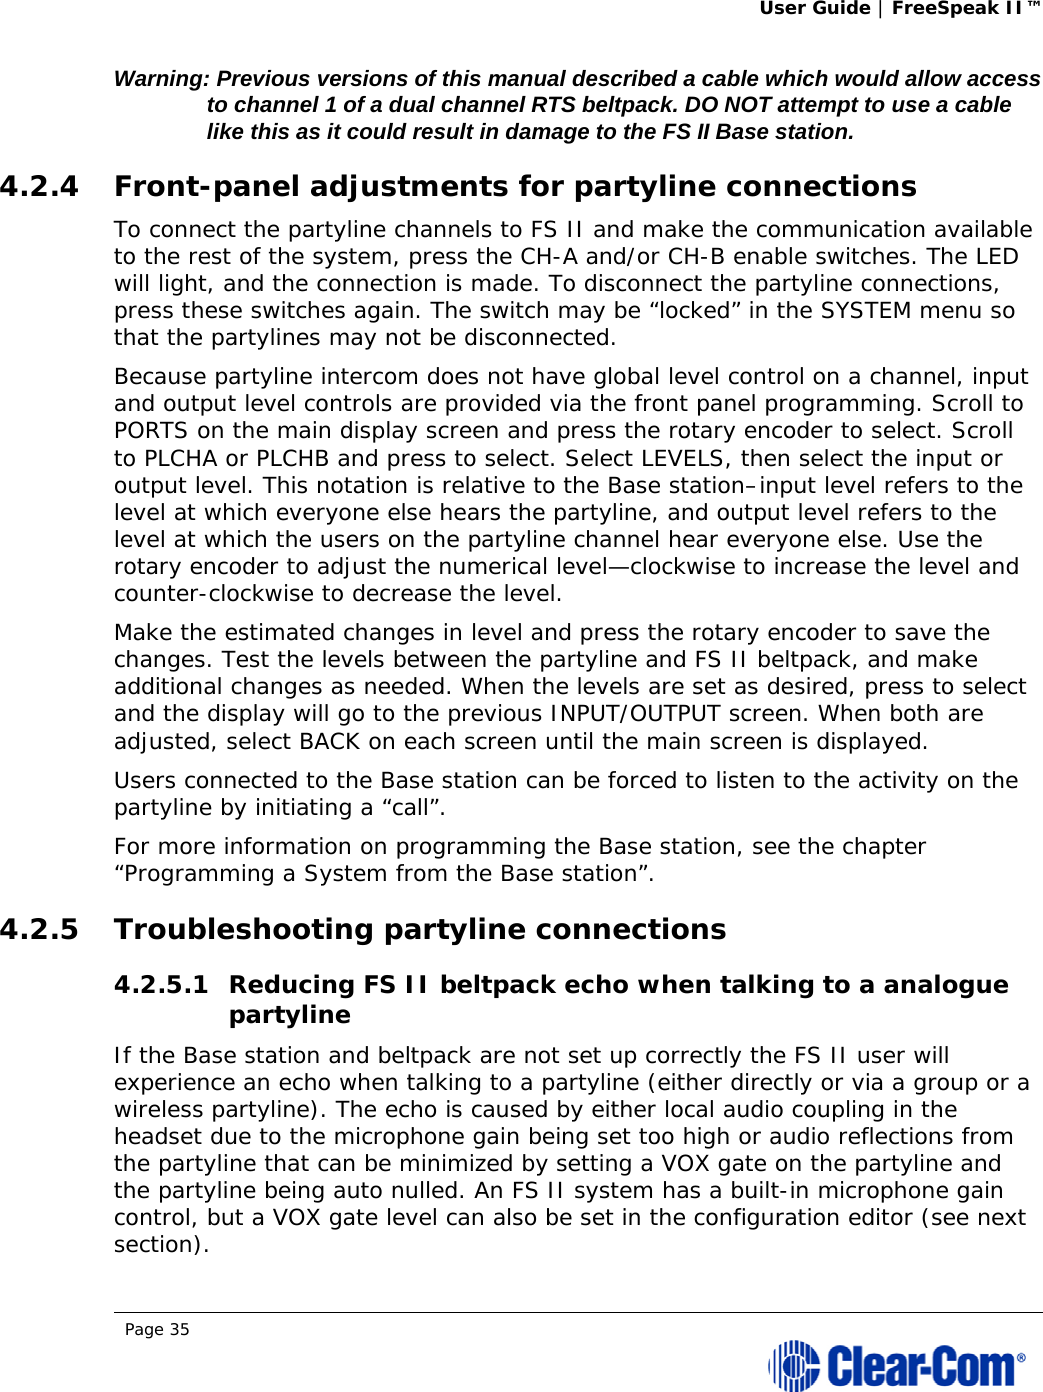 User Guide | FreeSpeak II™  Page 35  Warning: Previous versions of this manual described a cable which would allow access to channel 1 of a dual channel RTS beltpack. DO NOT attempt to use a cable like this as it could result in damage to the FS II Base station.  4.2.4 Front-panel adjustments for partyline connections To connect the partyline channels to FS II and make the communication available to the rest of the system, press the CH-A and/or CH-B enable switches. The LED will light, and the connection is made. To disconnect the partyline connections, press these switches again. The switch may be “locked” in the SYSTEM menu so that the partylines may not be disconnected. Because partyline intercom does not have global level control on a channel, input and output level controls are provided via the front panel programming. Scroll to PORTS on the main display screen and press the rotary encoder to select. Scroll to PLCHA or PLCHB and press to select. Select LEVELS, then select the input or output level. This notation is relative to the Base station–input level refers to the level at which everyone else hears the partyline, and output level refers to the level at which the users on the partyline channel hear everyone else. Use the rotary encoder to adjust the numerical level—clockwise to increase the level and counter-clockwise to decrease the level. Make the estimated changes in level and press the rotary encoder to save the changes. Test the levels between the partyline and FS II beltpack, and make additional changes as needed. When the levels are set as desired, press to select and the display will go to the previous INPUT/OUTPUT screen. When both are adjusted, select BACK on each screen until the main screen is displayed.  Users connected to the Base station can be forced to listen to the activity on the partyline by initiating a “call”.  For more information on programming the Base station, see the chapter “Programming a System from the Base station”.  4.2.5 Troubleshooting partyline connections 4.2.5.1 Reducing FS II beltpack echo when talking to a analogue partyline If the Base station and beltpack are not set up correctly the FS II user will experience an echo when talking to a partyline (either directly or via a group or a wireless partyline). The echo is caused by either local audio coupling in the headset due to the microphone gain being set too high or audio reflections from the partyline that can be minimized by setting a VOX gate on the partyline and the partyline being auto nulled. An FS II system has a built-in microphone gain control, but a VOX gate level can also be set in the configuration editor (see next section). 